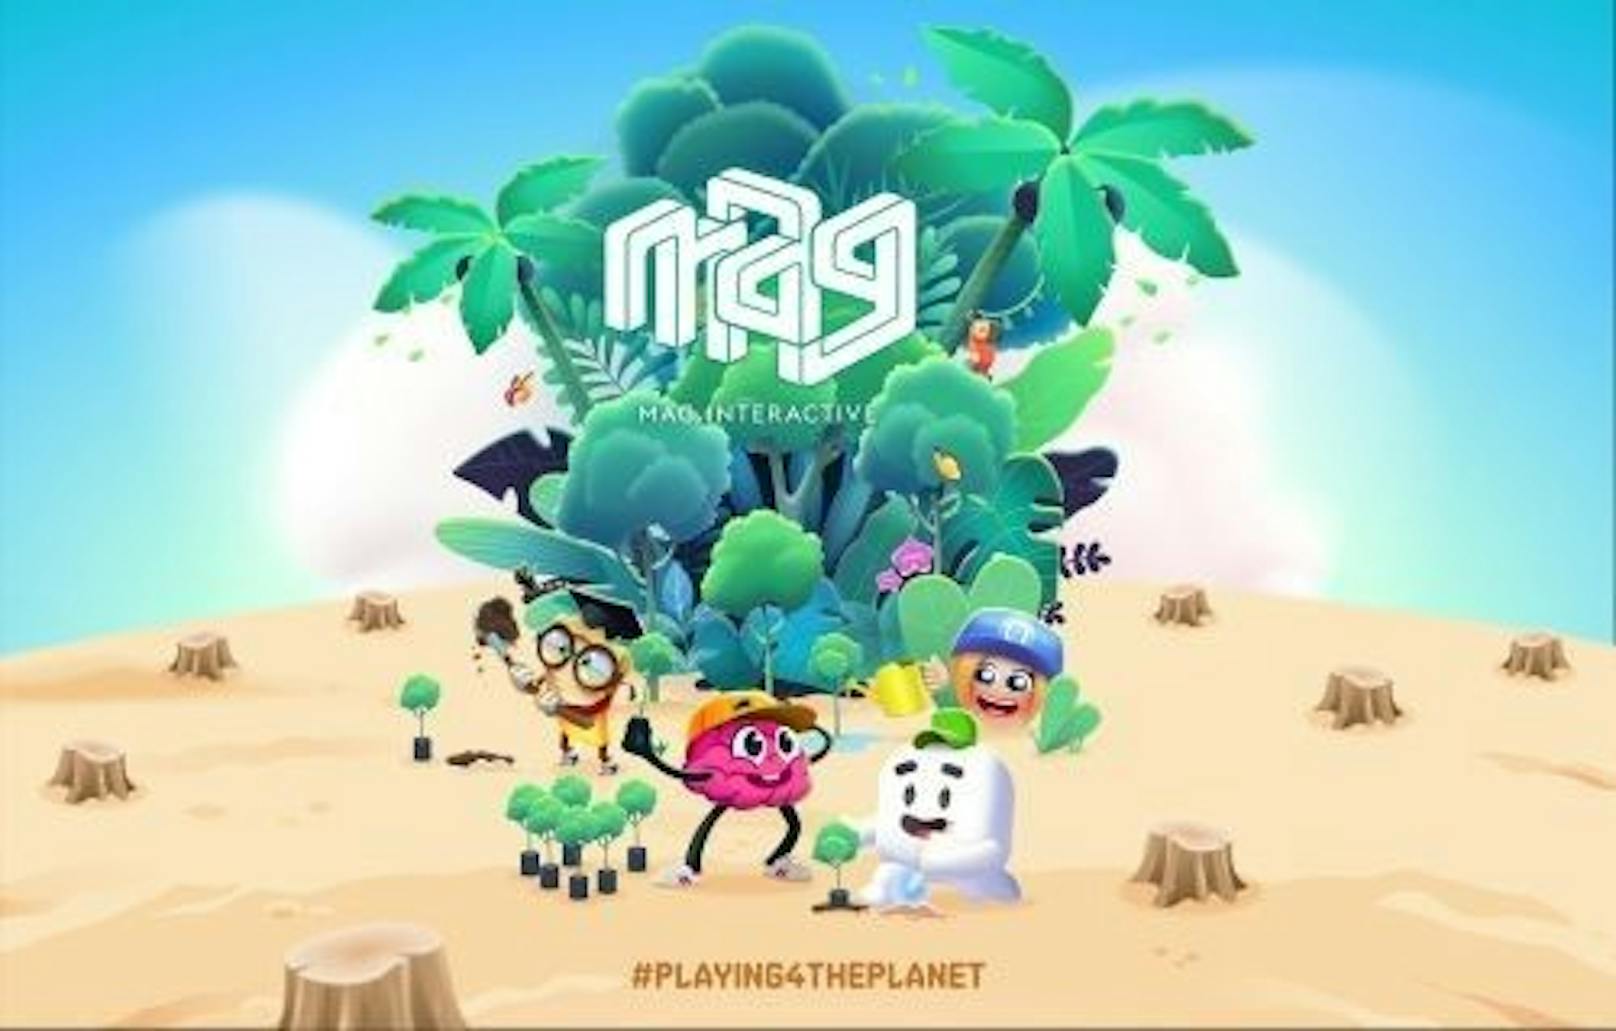 MAG Interactive ist das dritte Jahr in Folge Teil der "Playing for the Planet"-Kampagne.